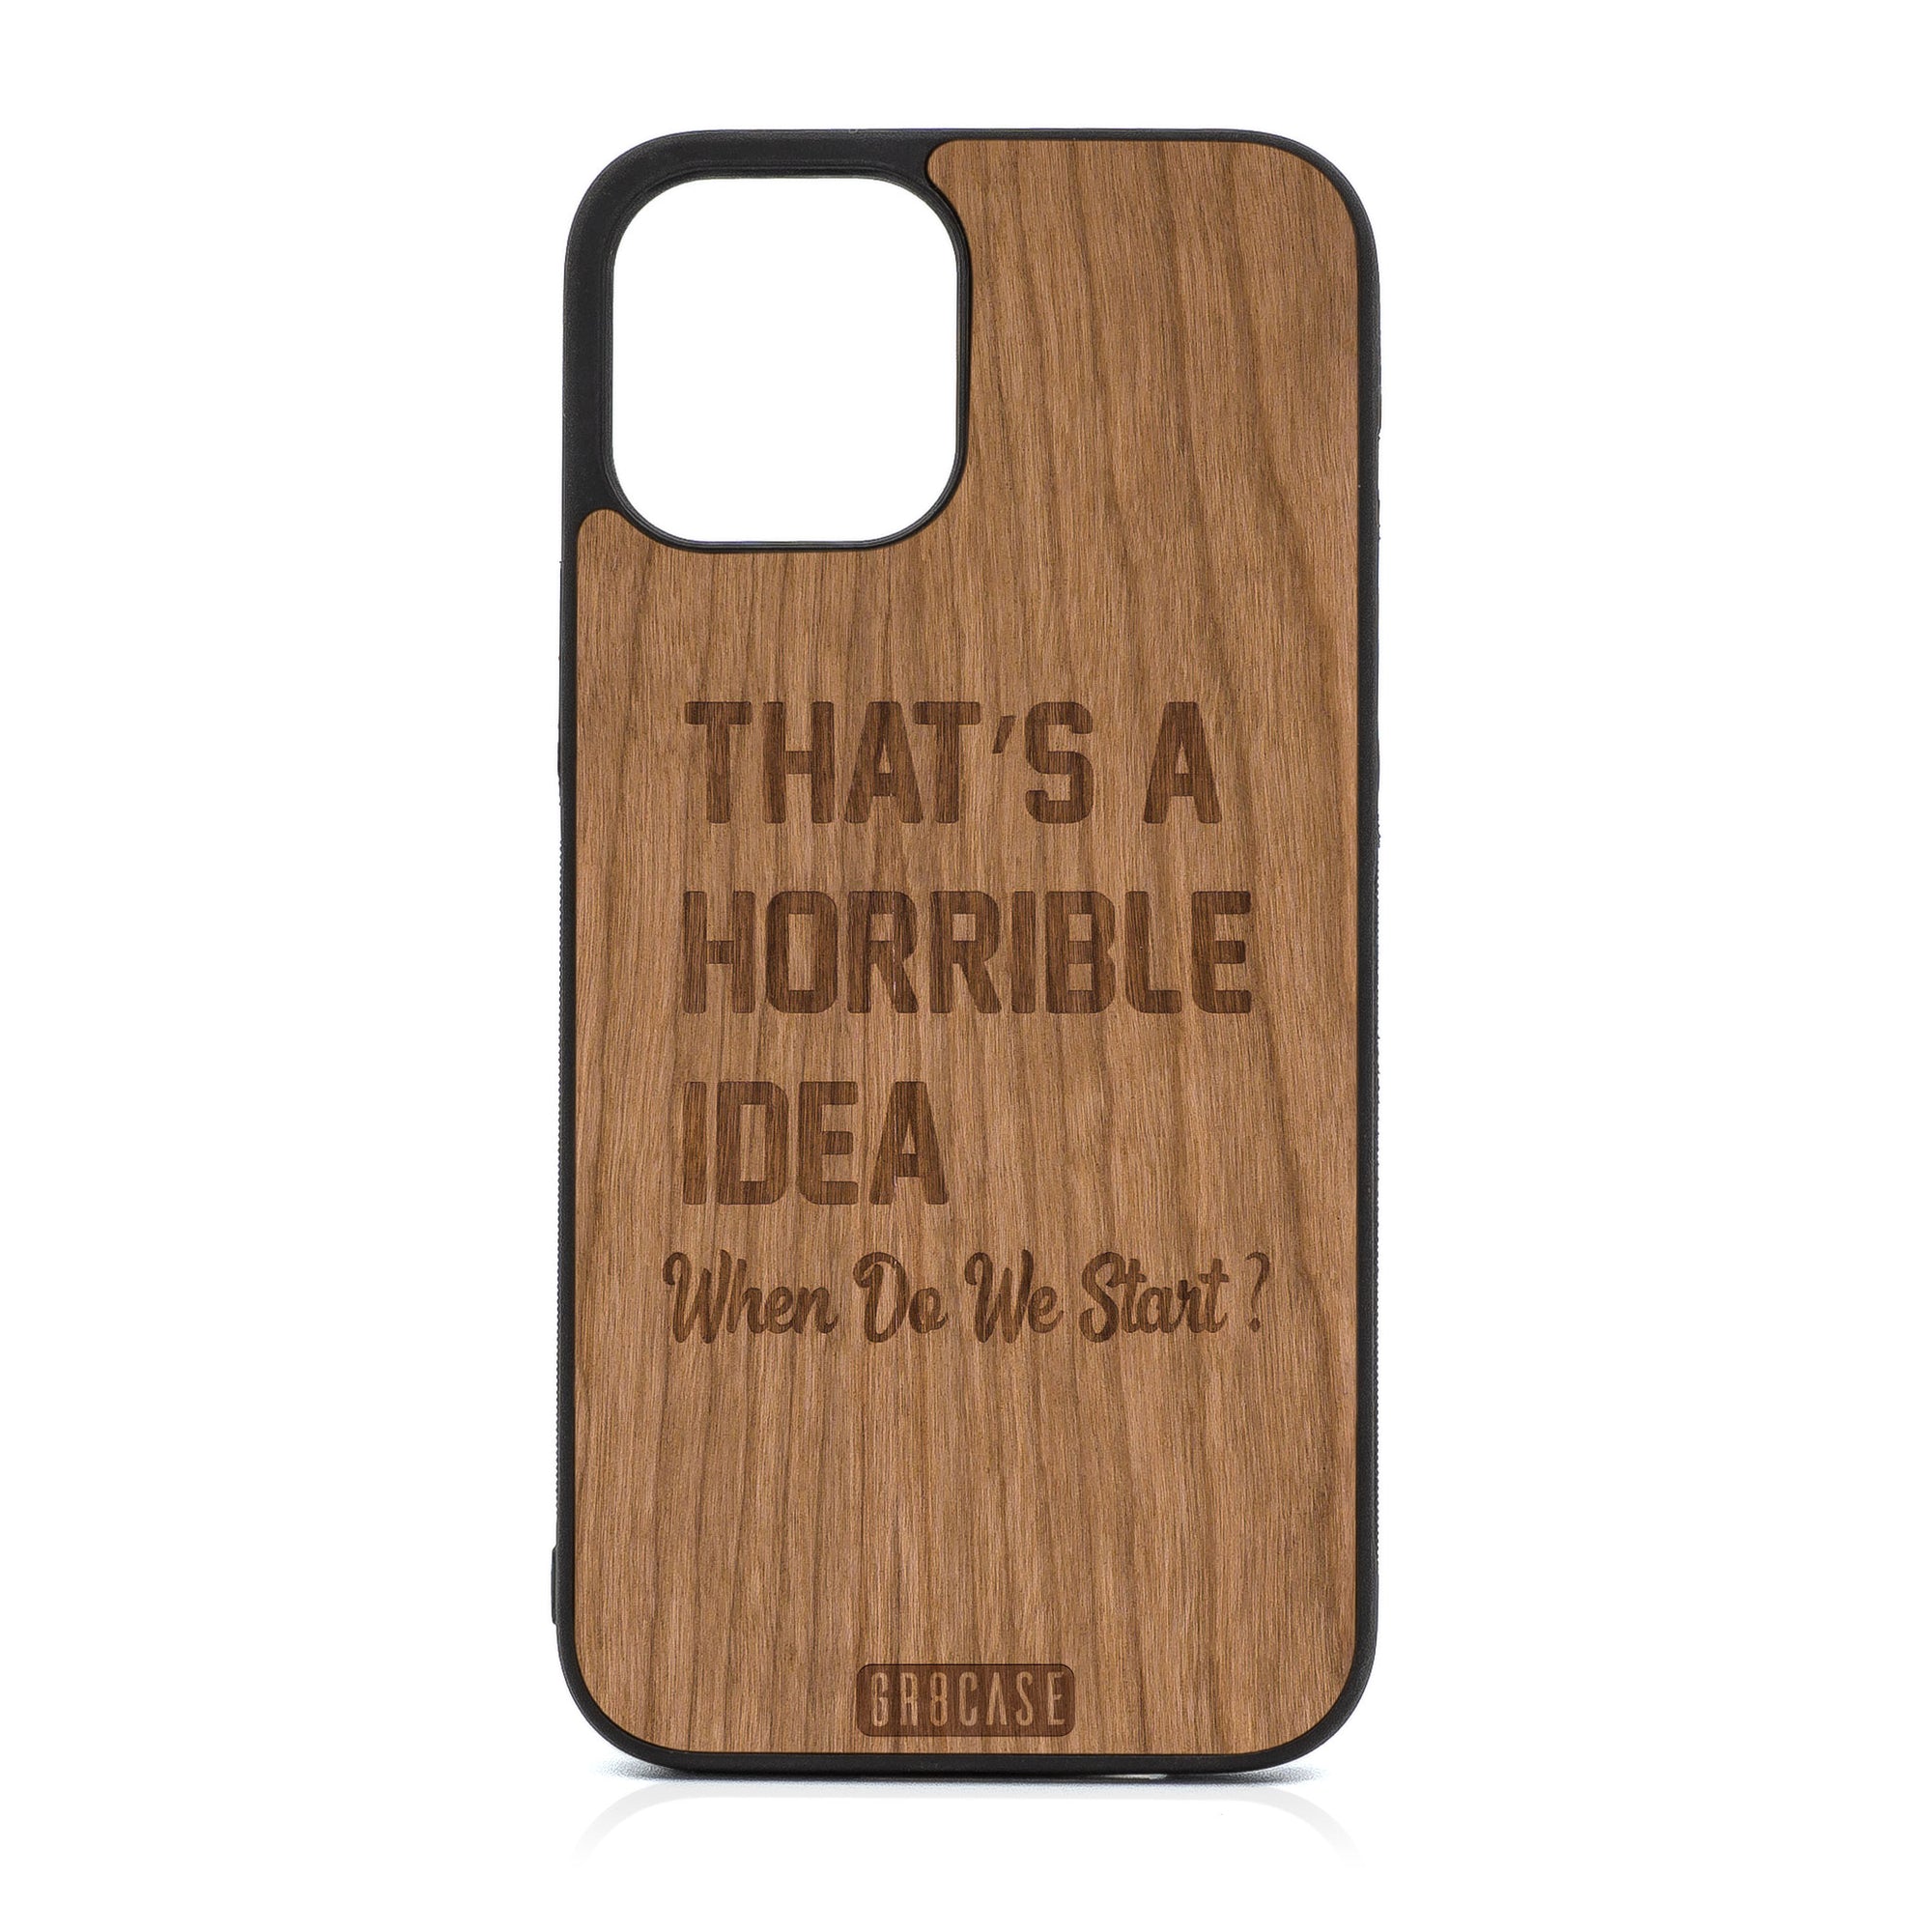 That’s A Horrible Idea When Do We Start Design Wood Case For iPhone 12 Pro Max